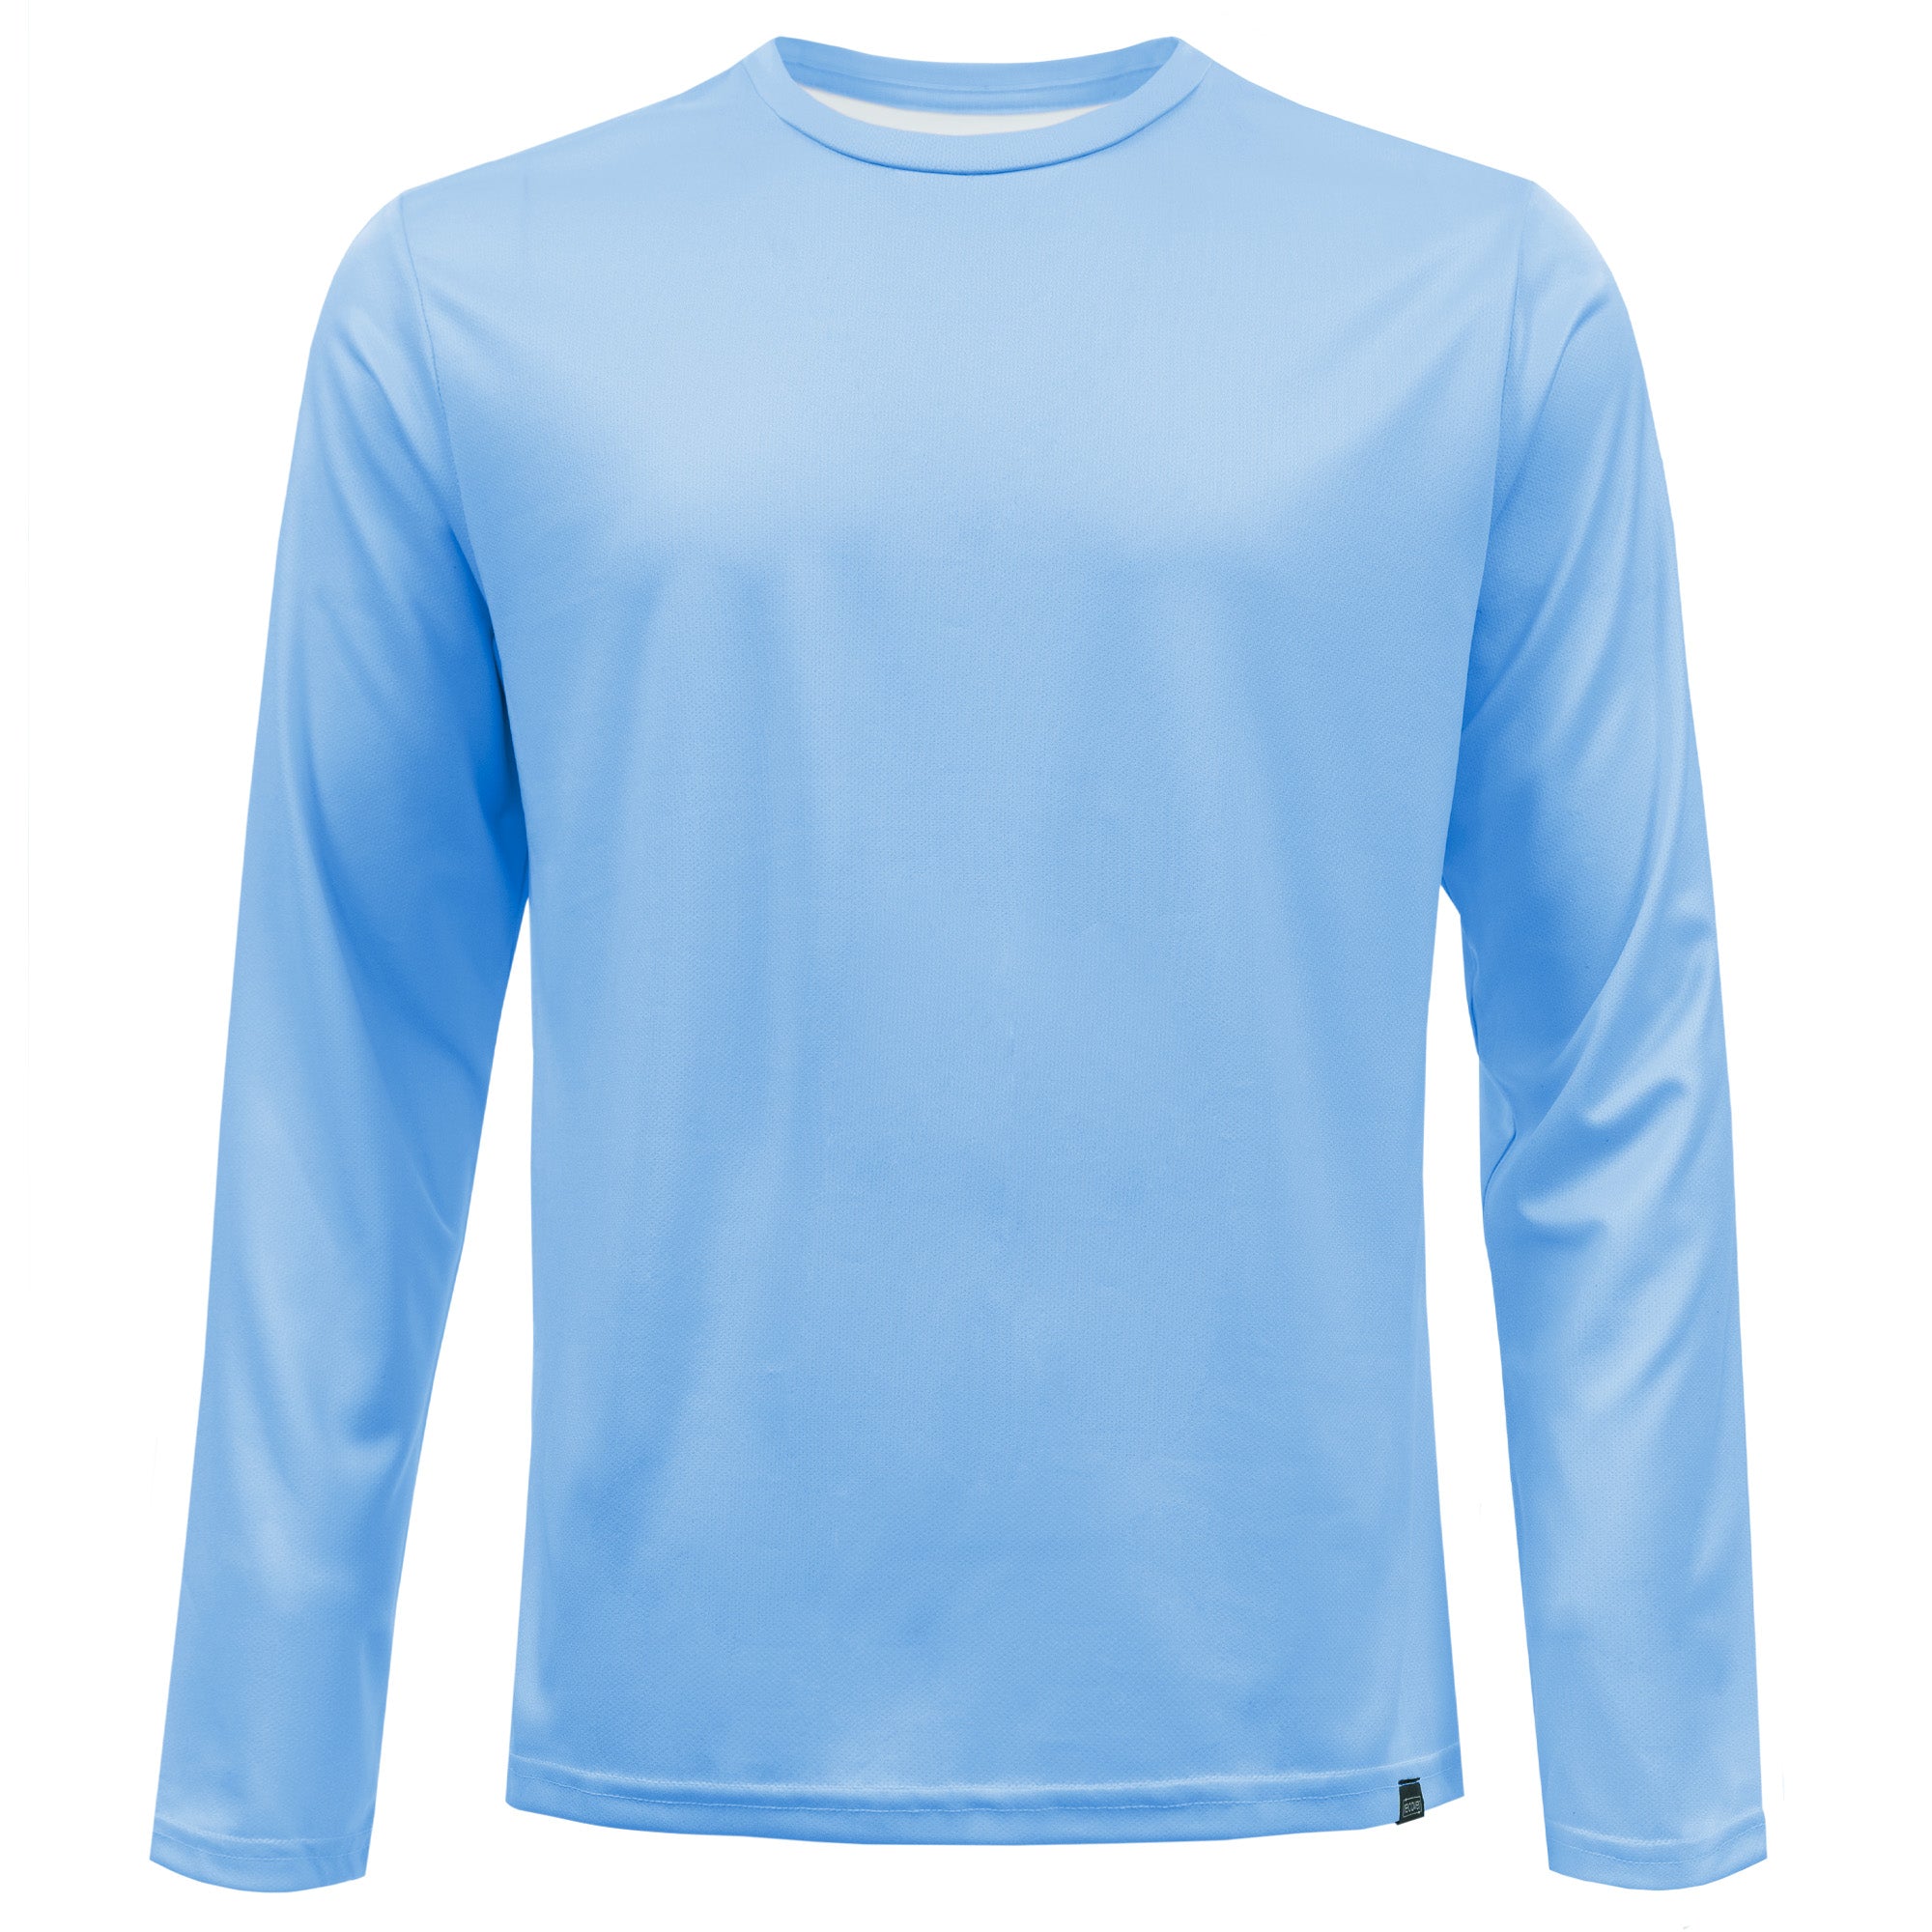 Light Blue 3 Athletic Sports Mesh Knit 100% Polyester Apparel